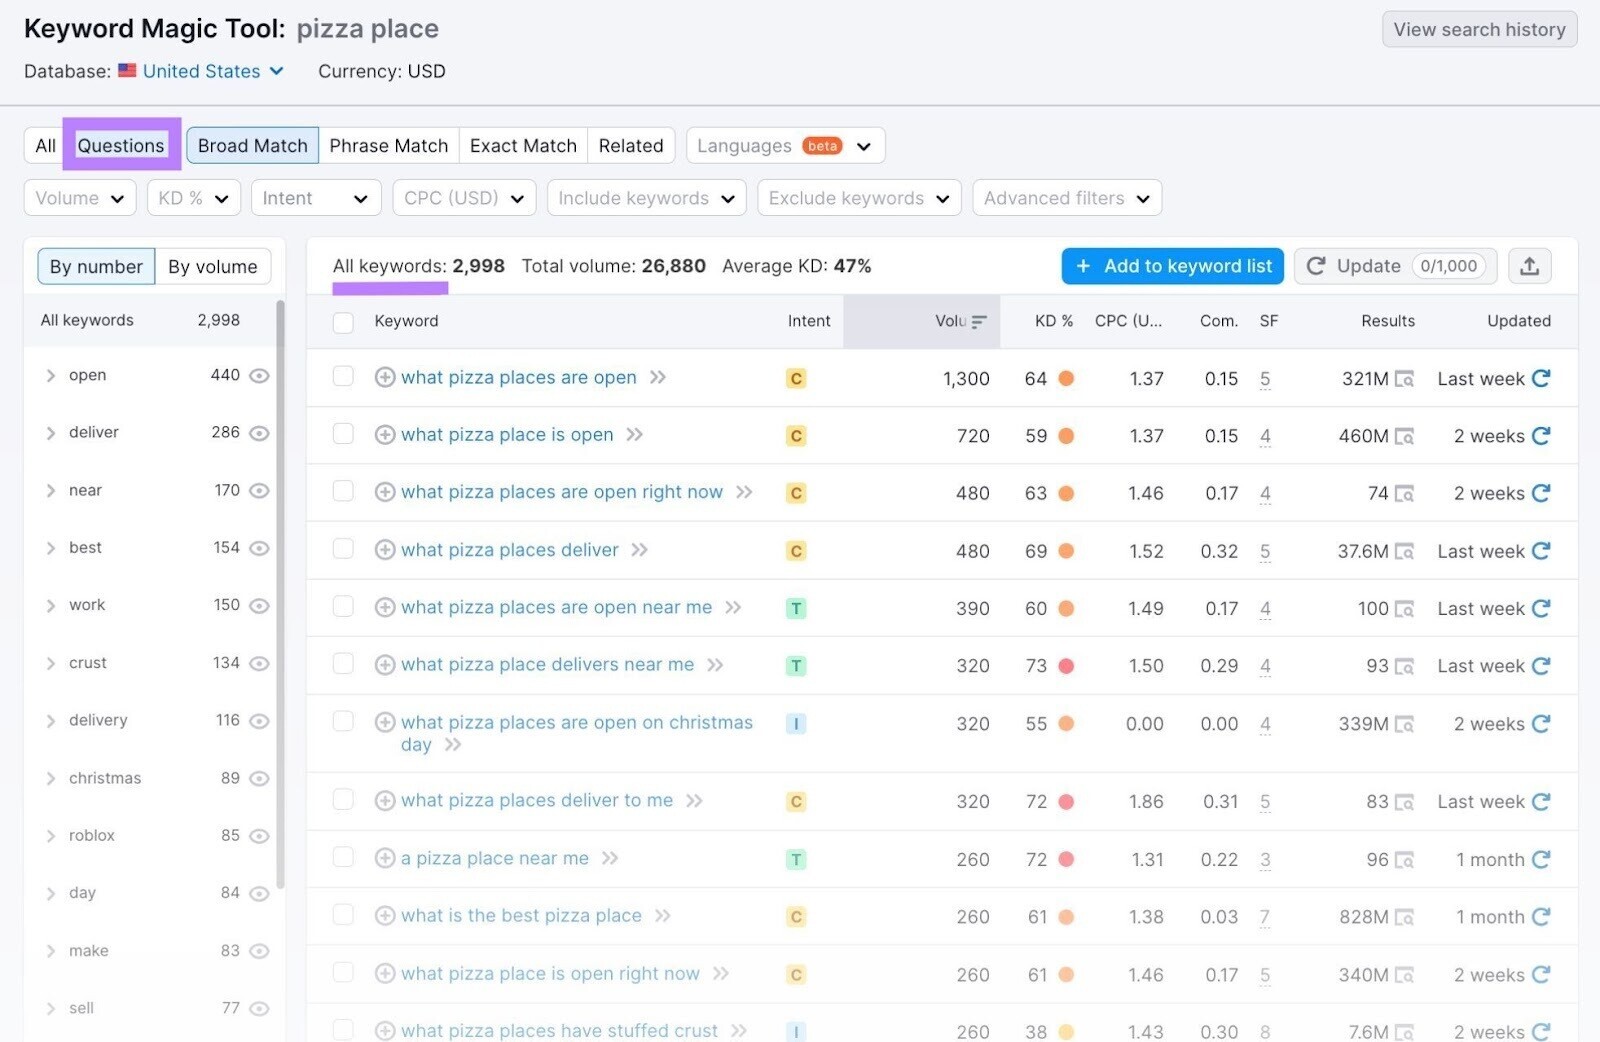 “Questions” tab for "pizza place" query shows the most popular questions users are asking